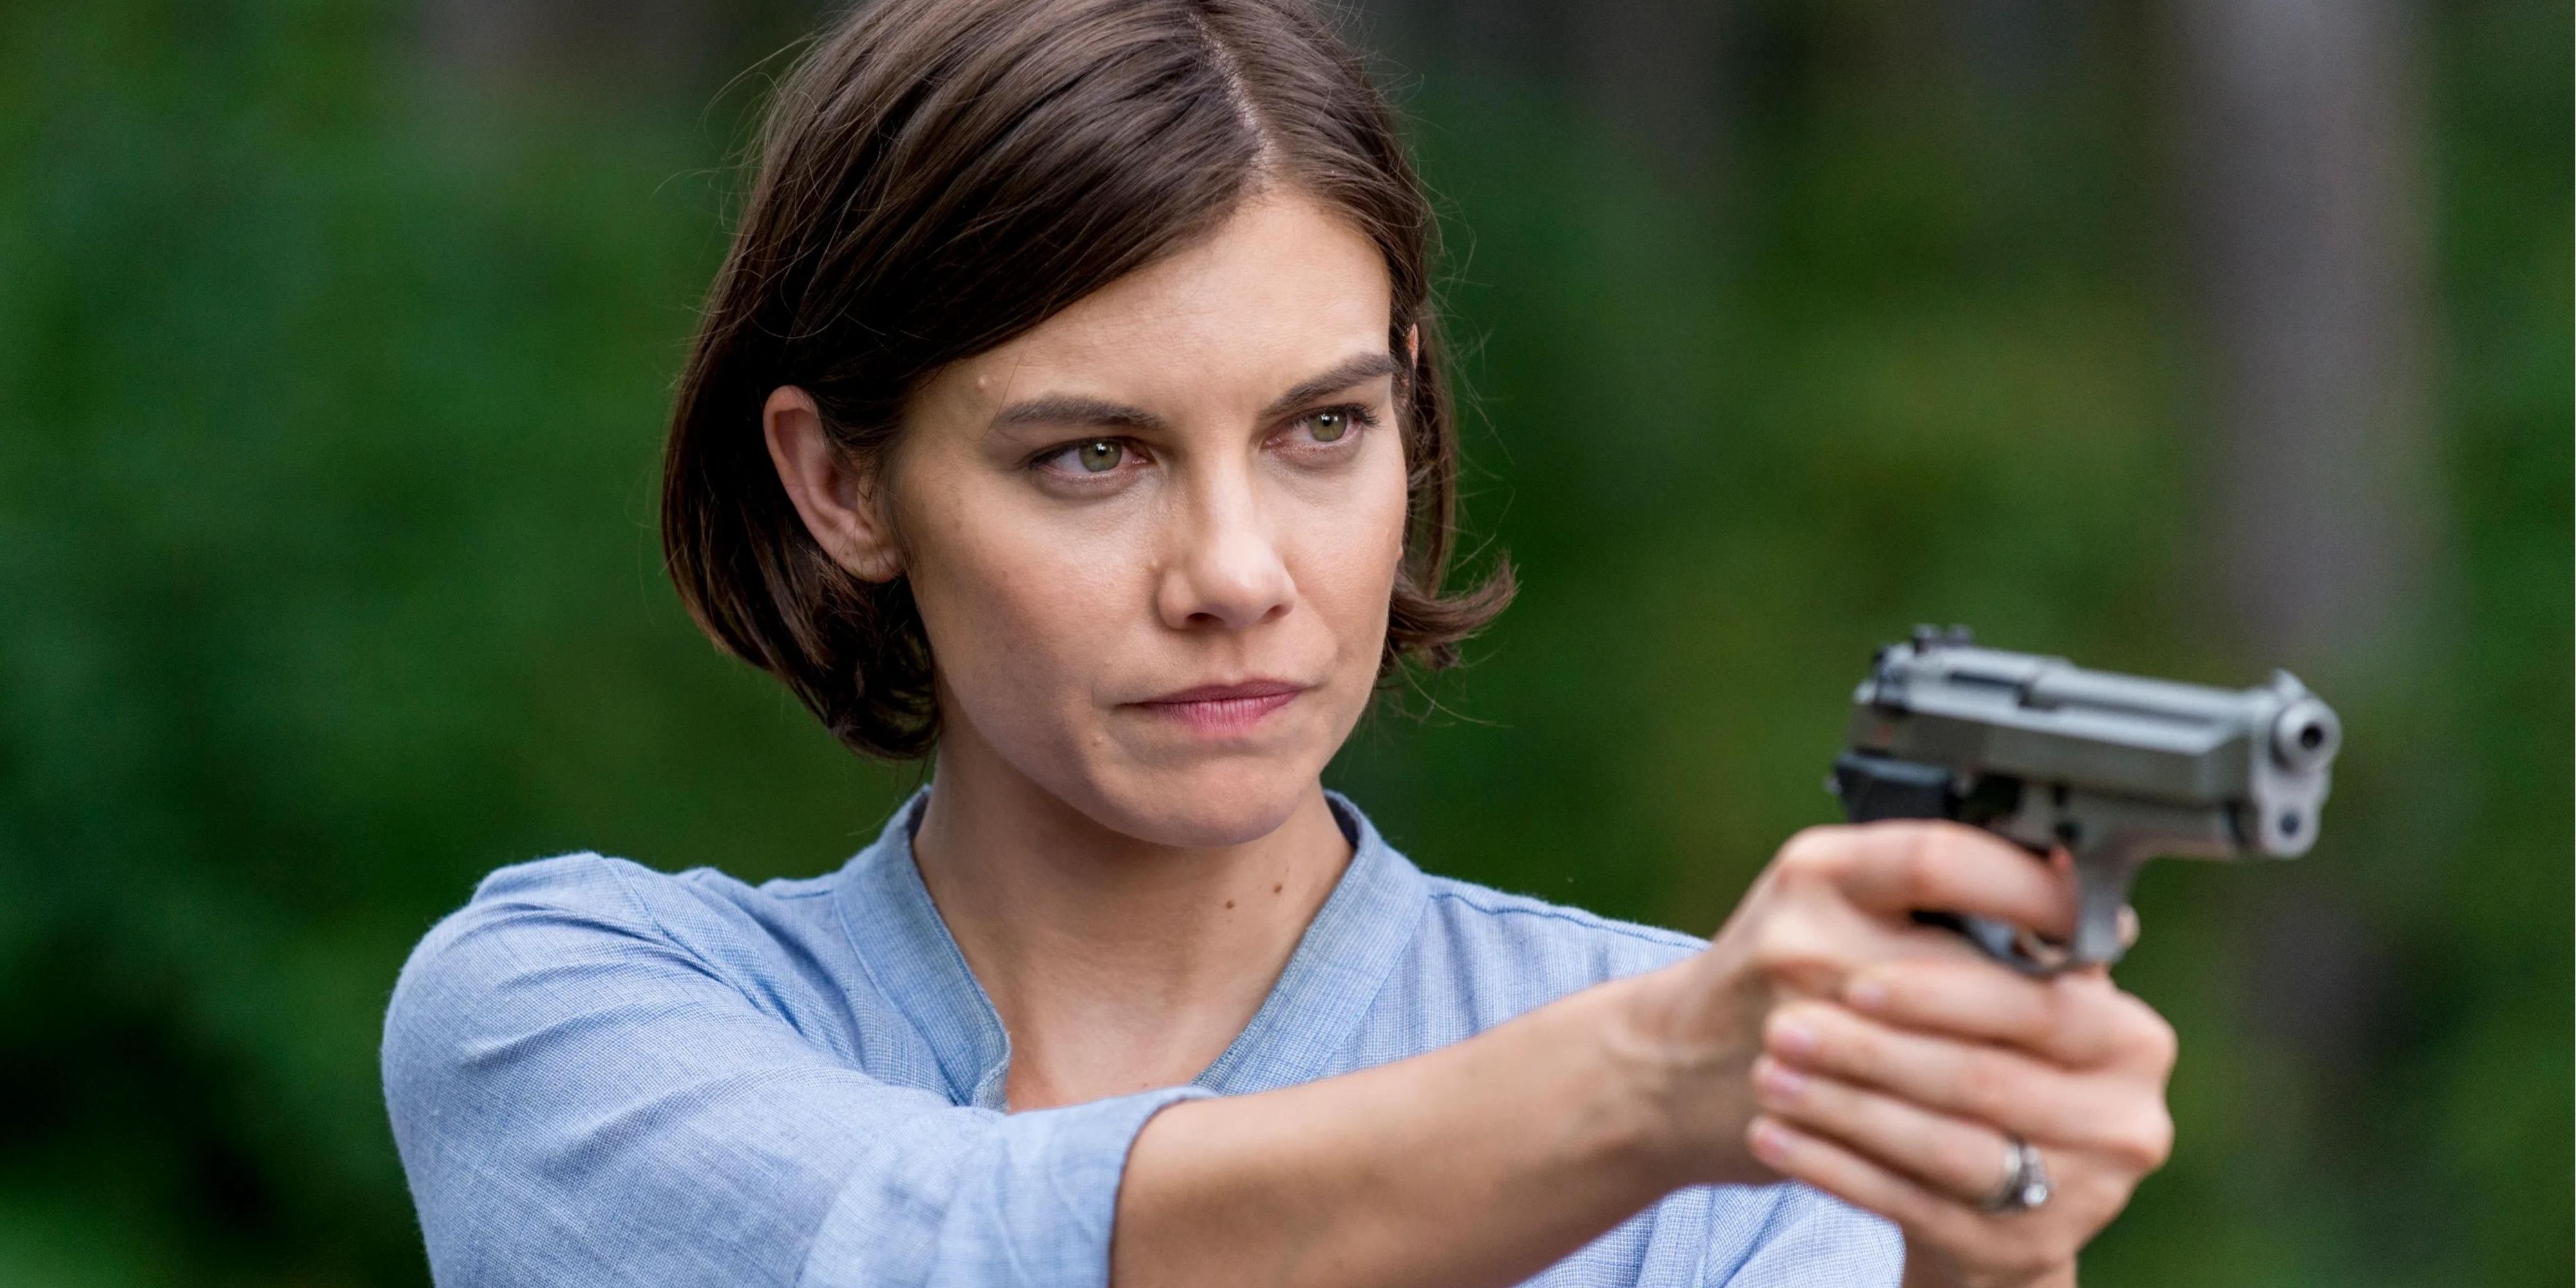 Lauren Cohan as Maggie in The Walking Dead with short hair holding a gun